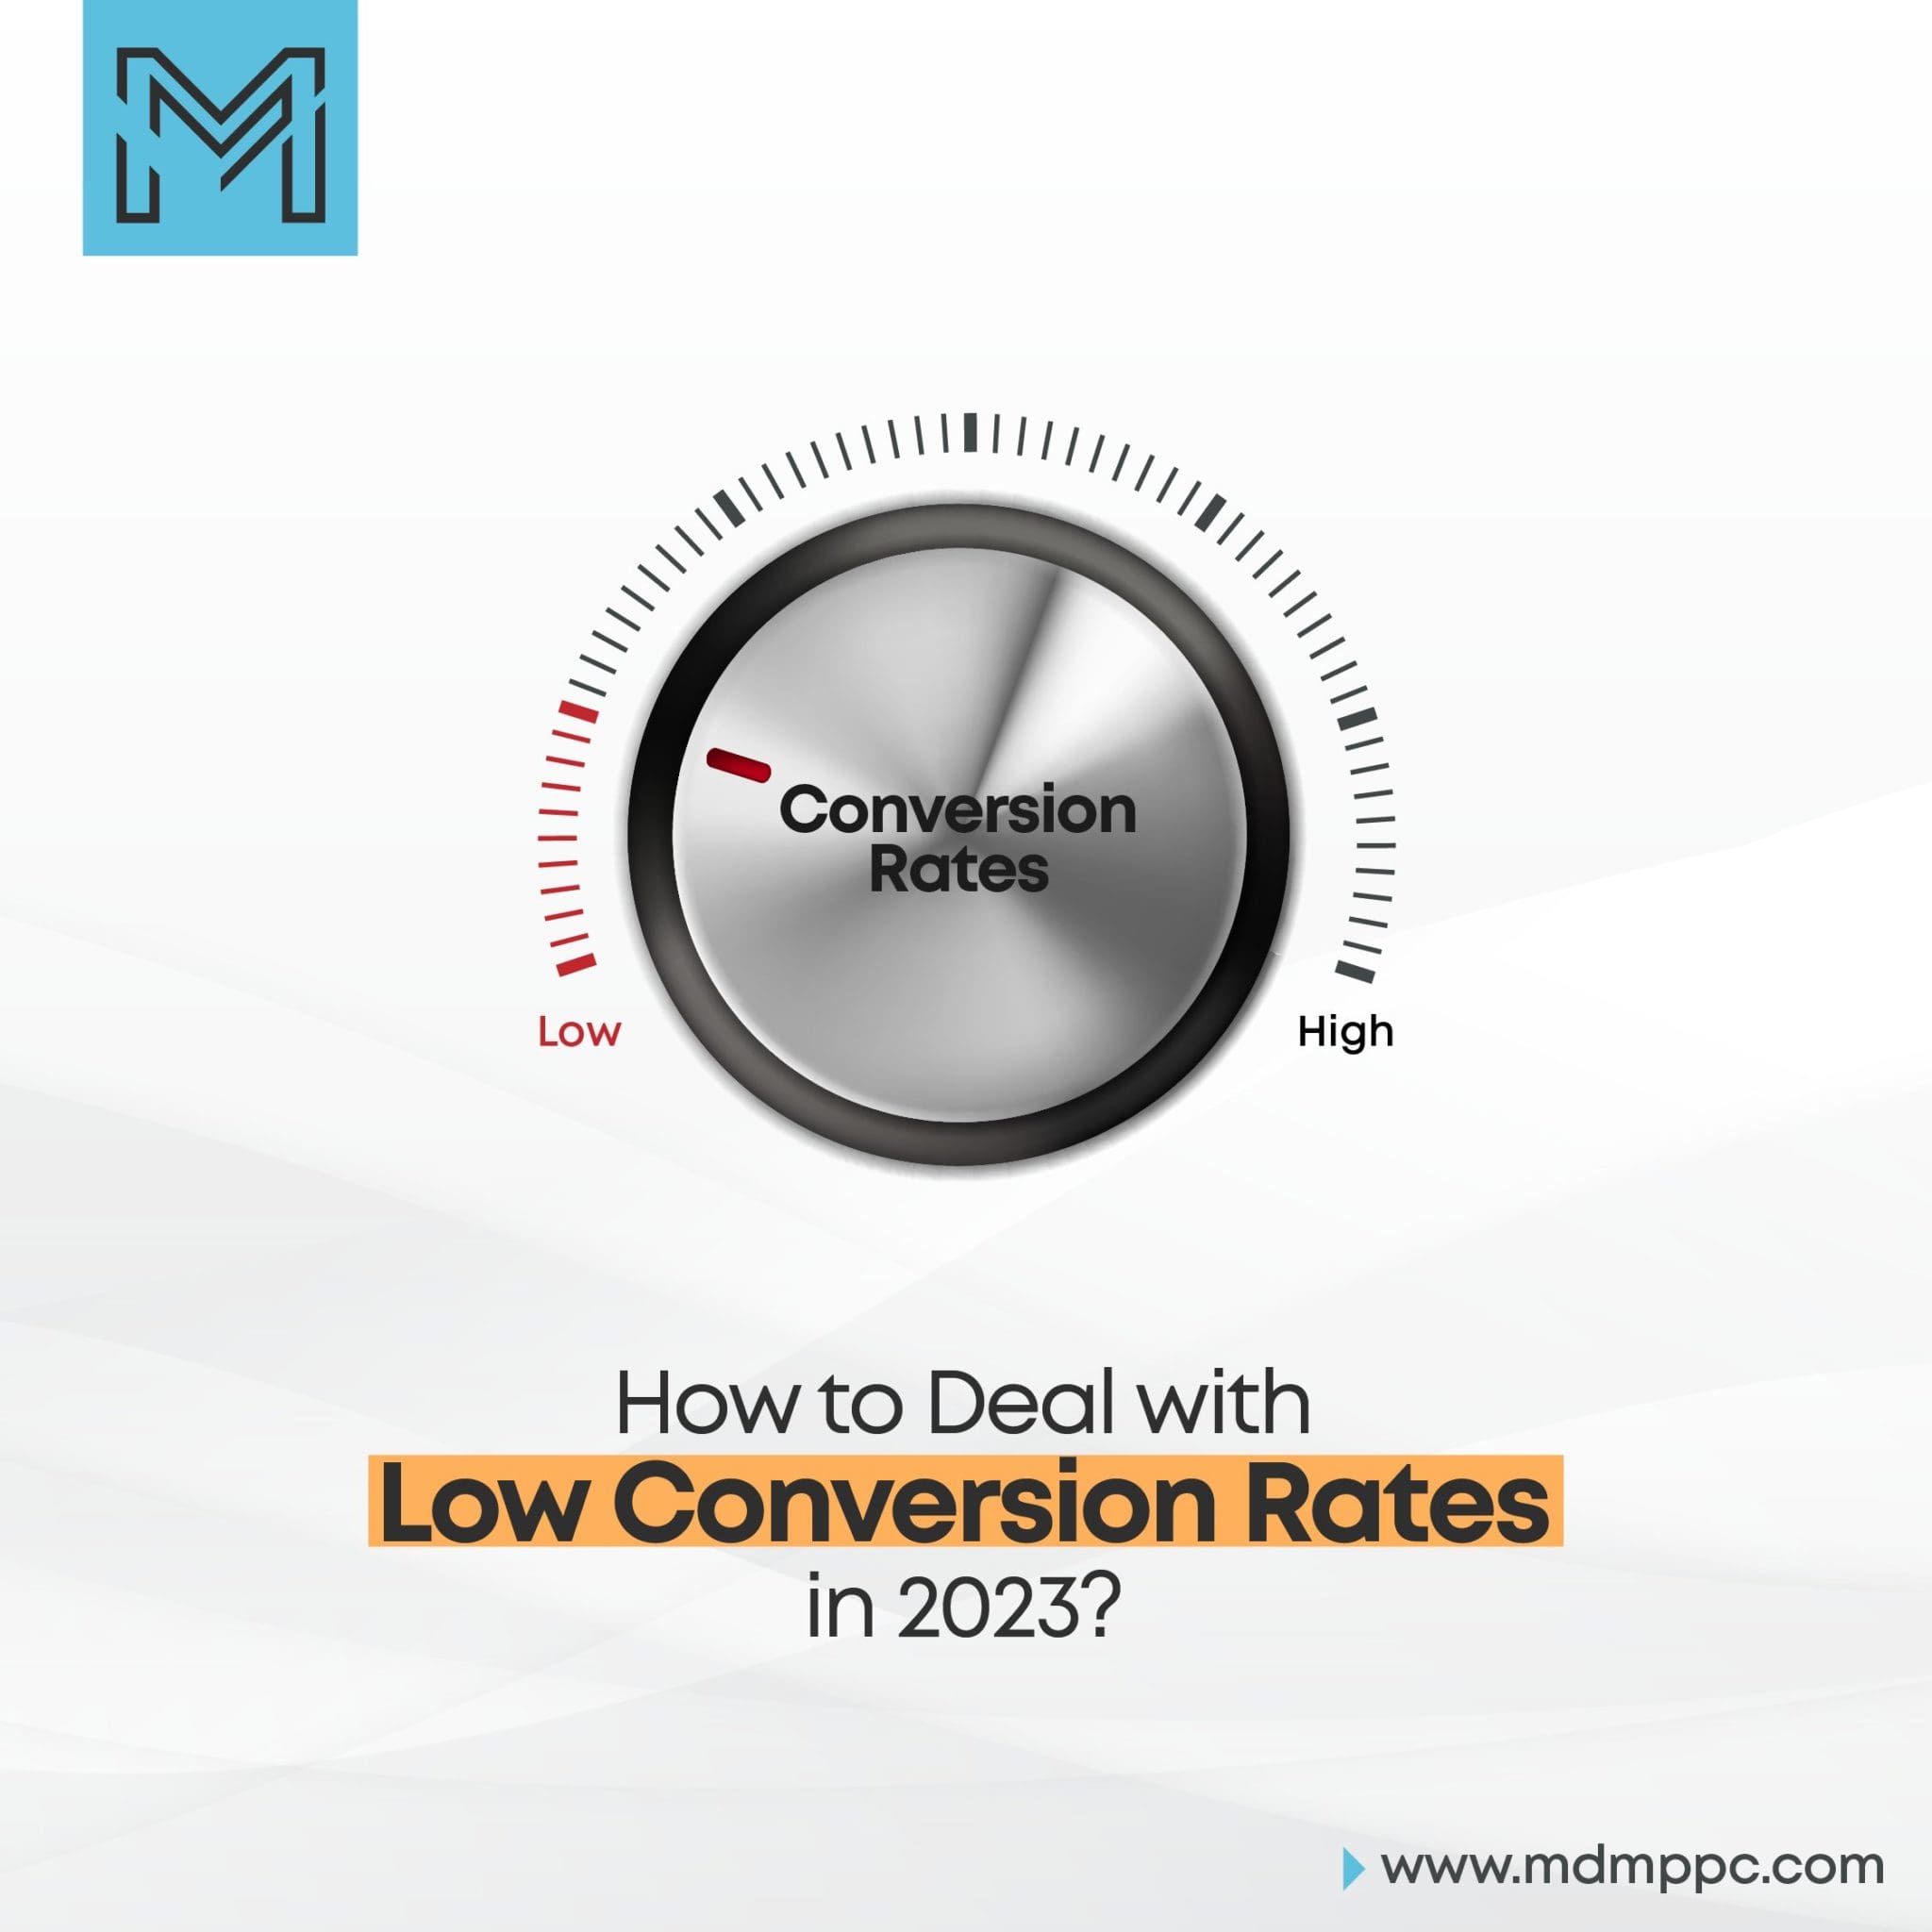 How to Deal with Low Conversion Rates in 2023?